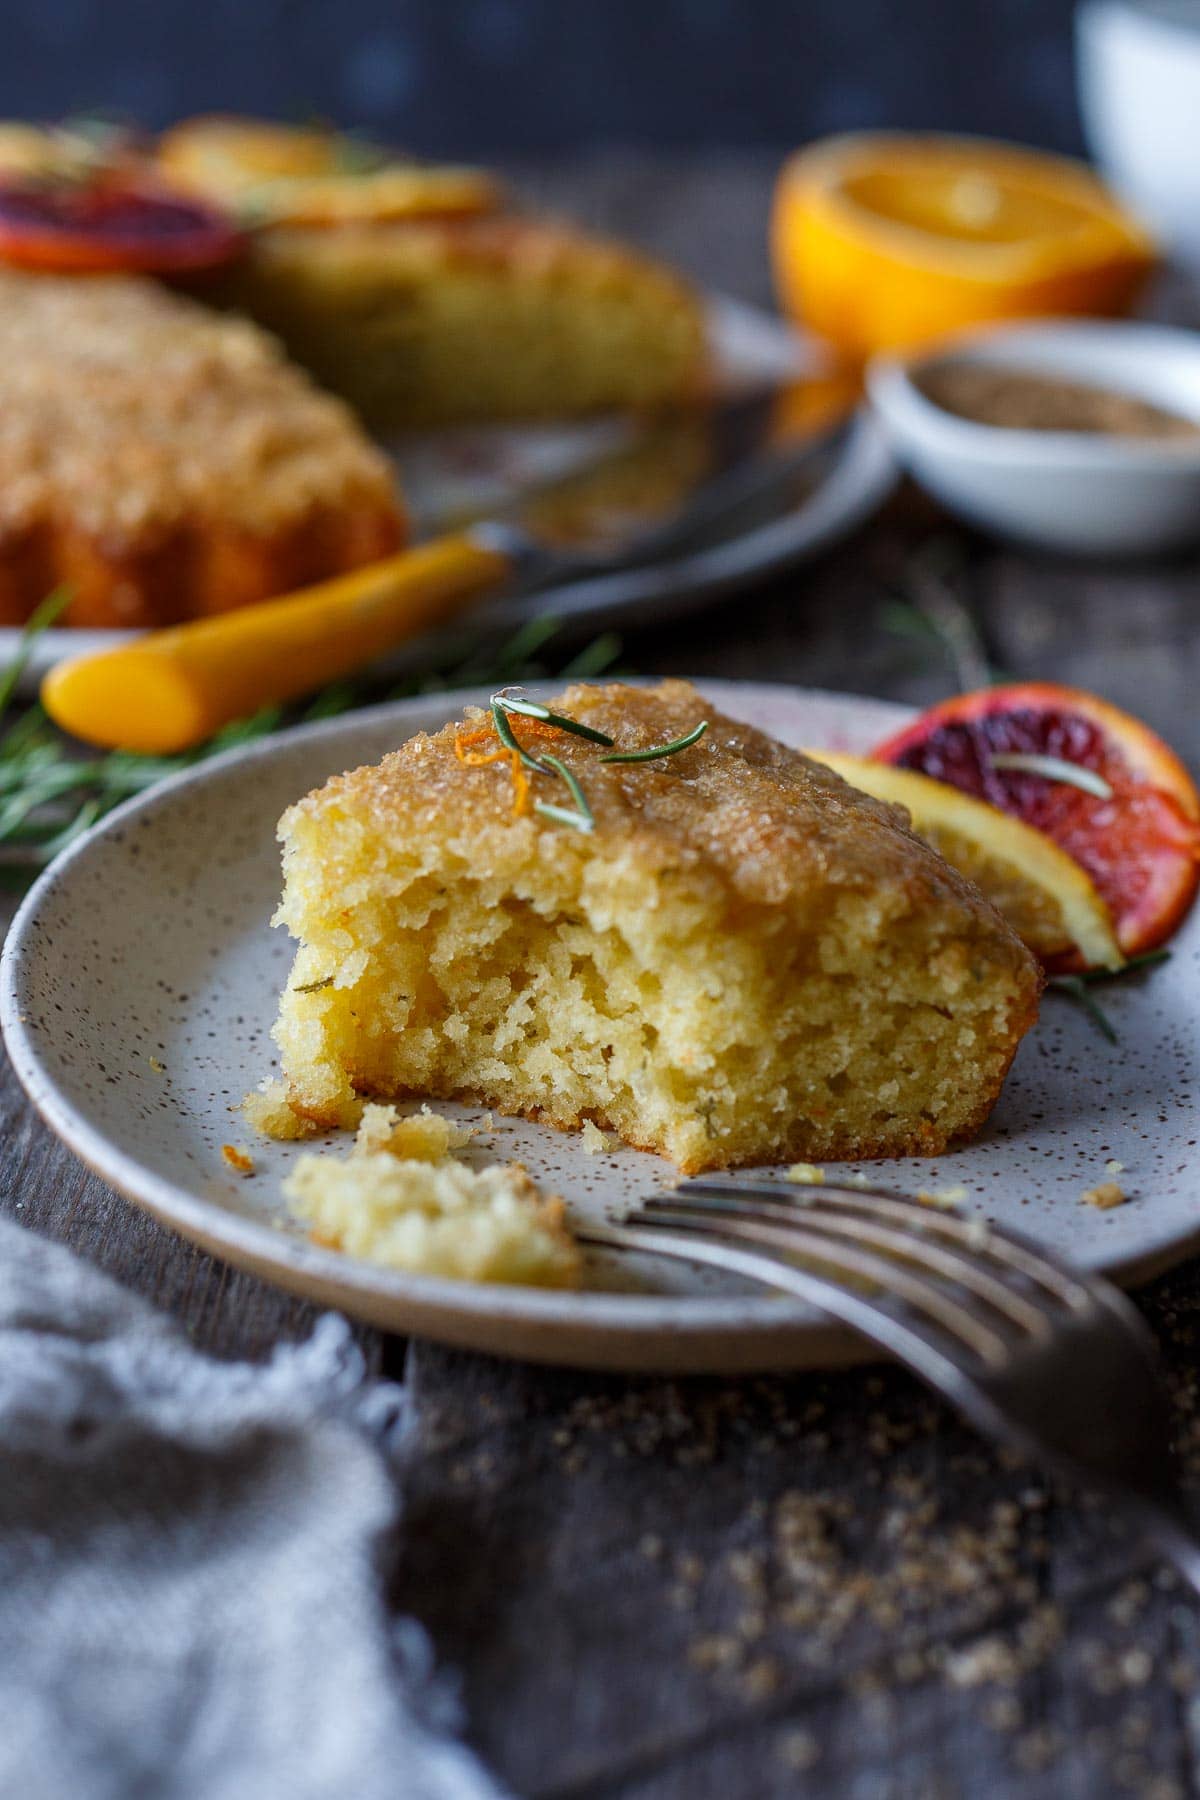 Topped with fresh rosemary and orange zest, this olive oil cake is easy to make, has a lovely rustic texture and stays moist for days.  Slightly sweetened, it is perfect for dessert, brunch or afternoon tea.